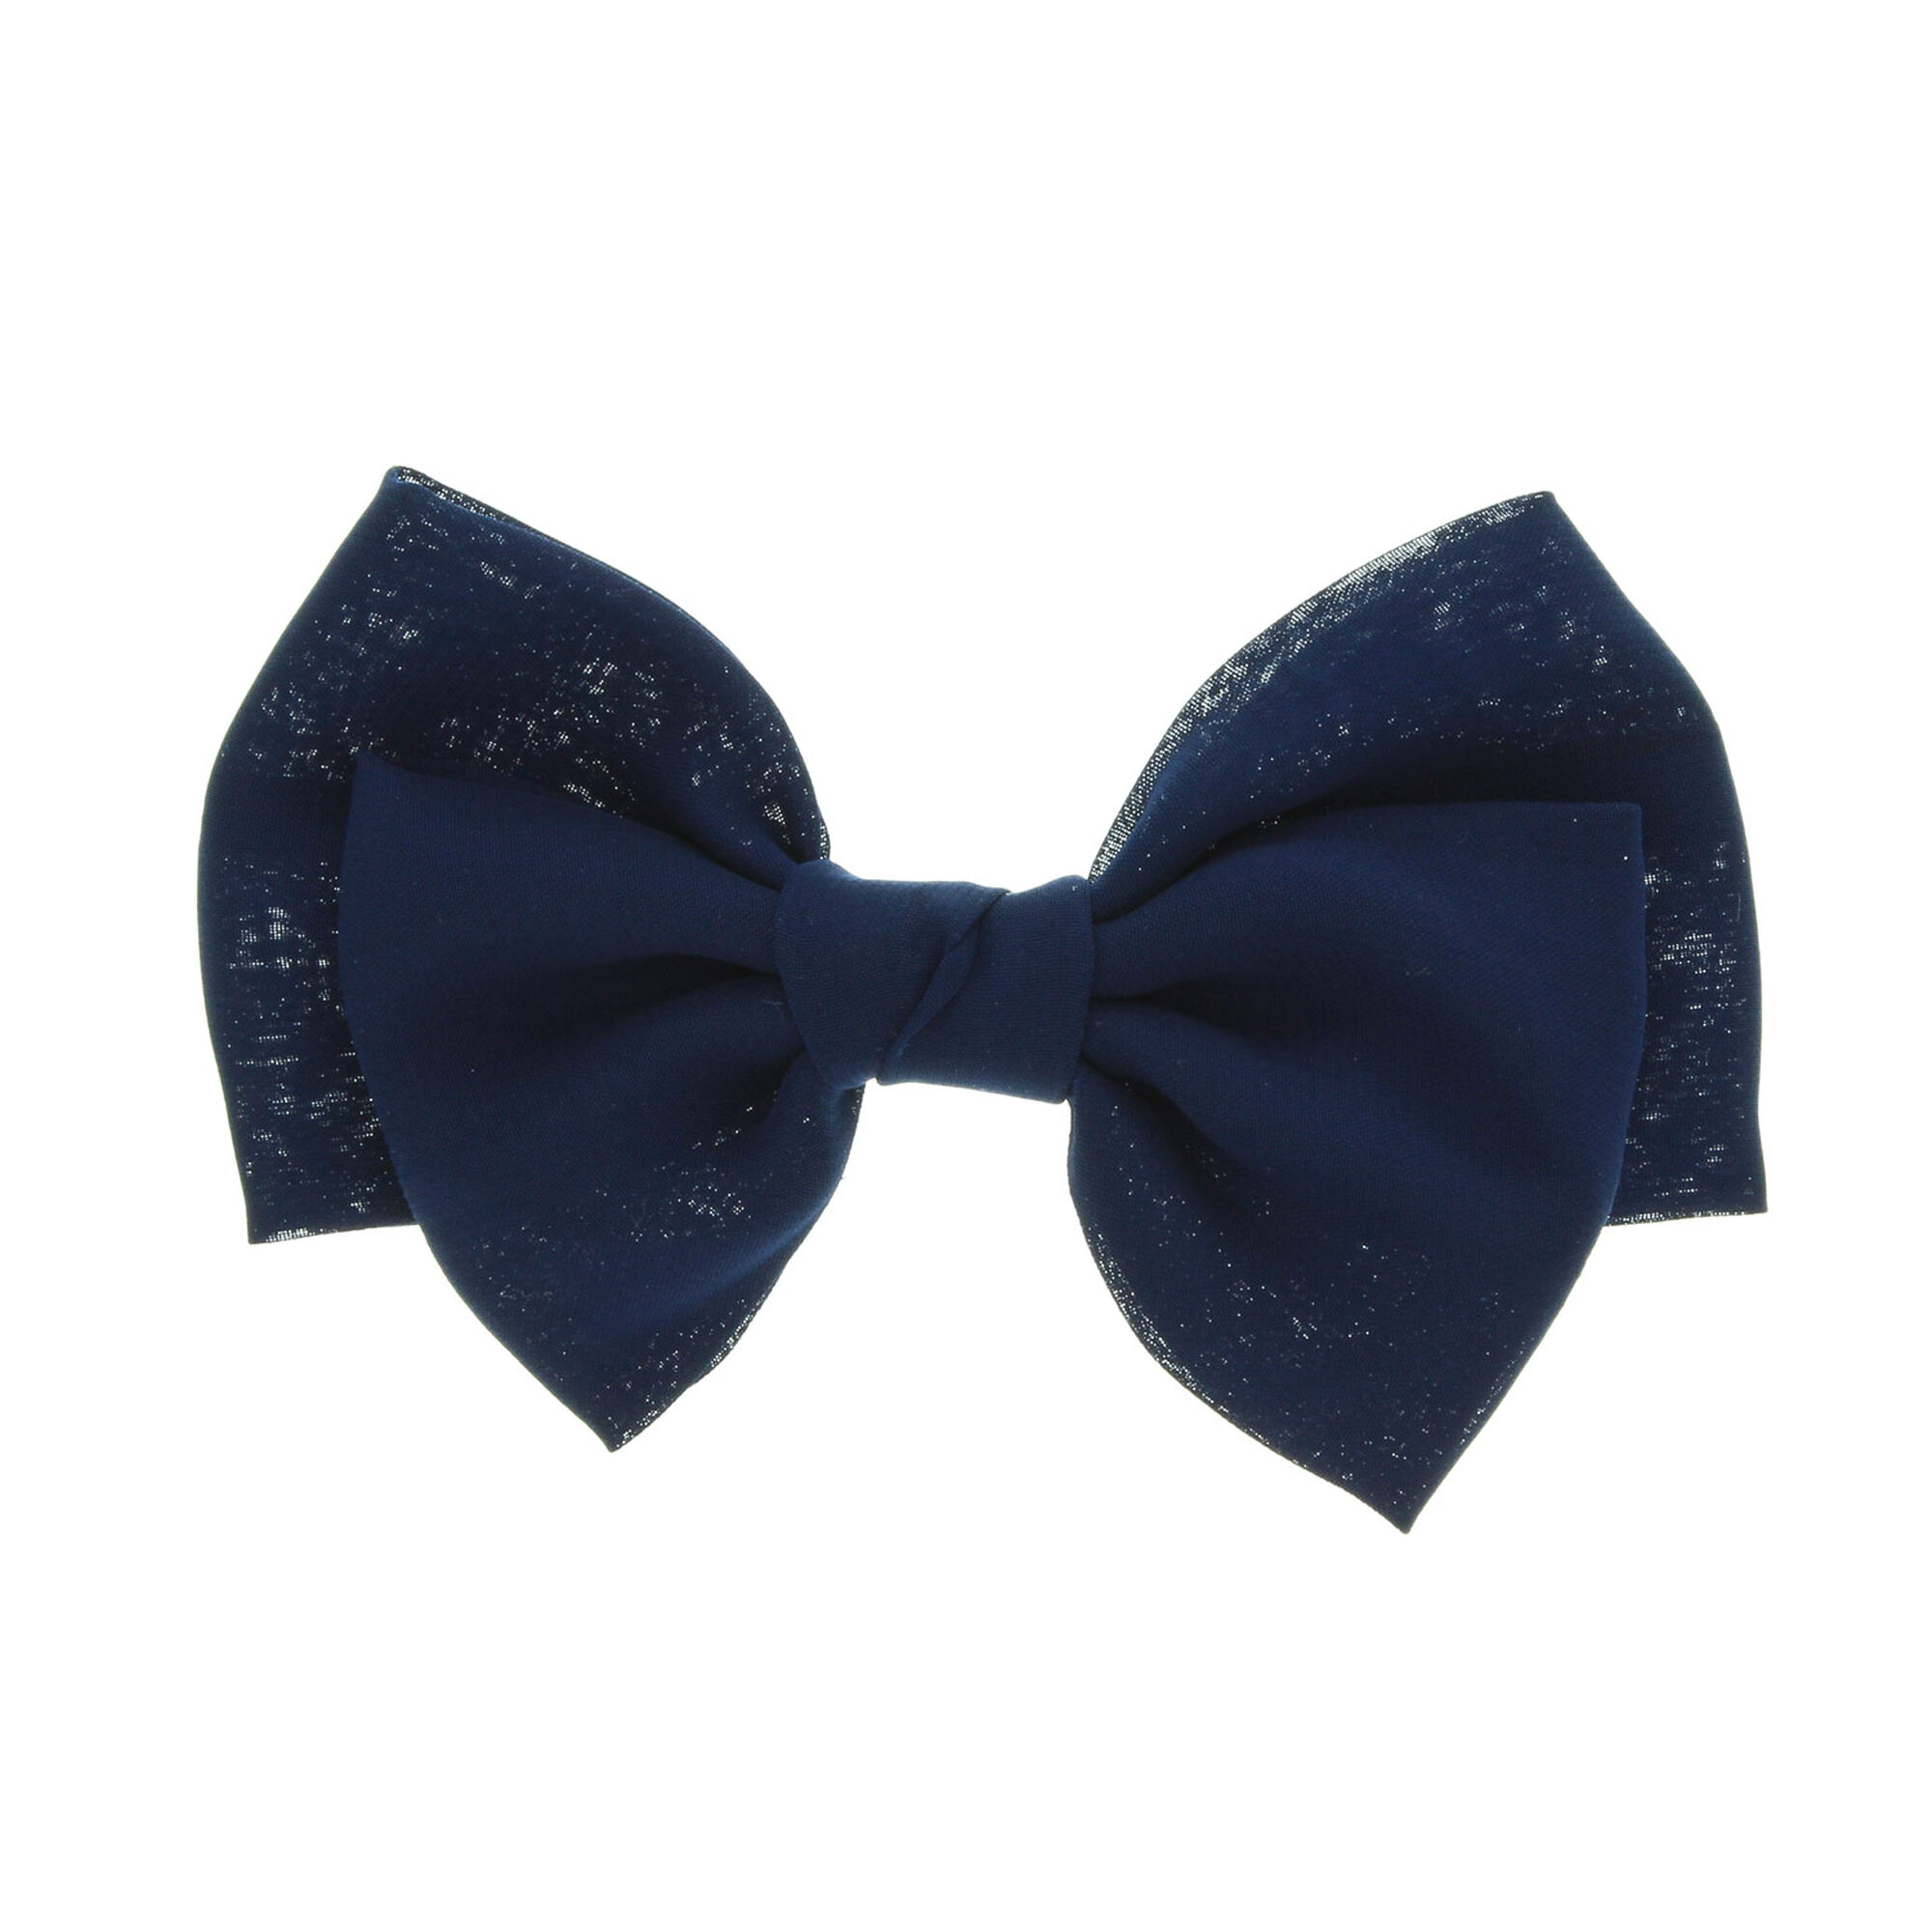 Large Floppy Hair Bow Clip - Navy | Claire's